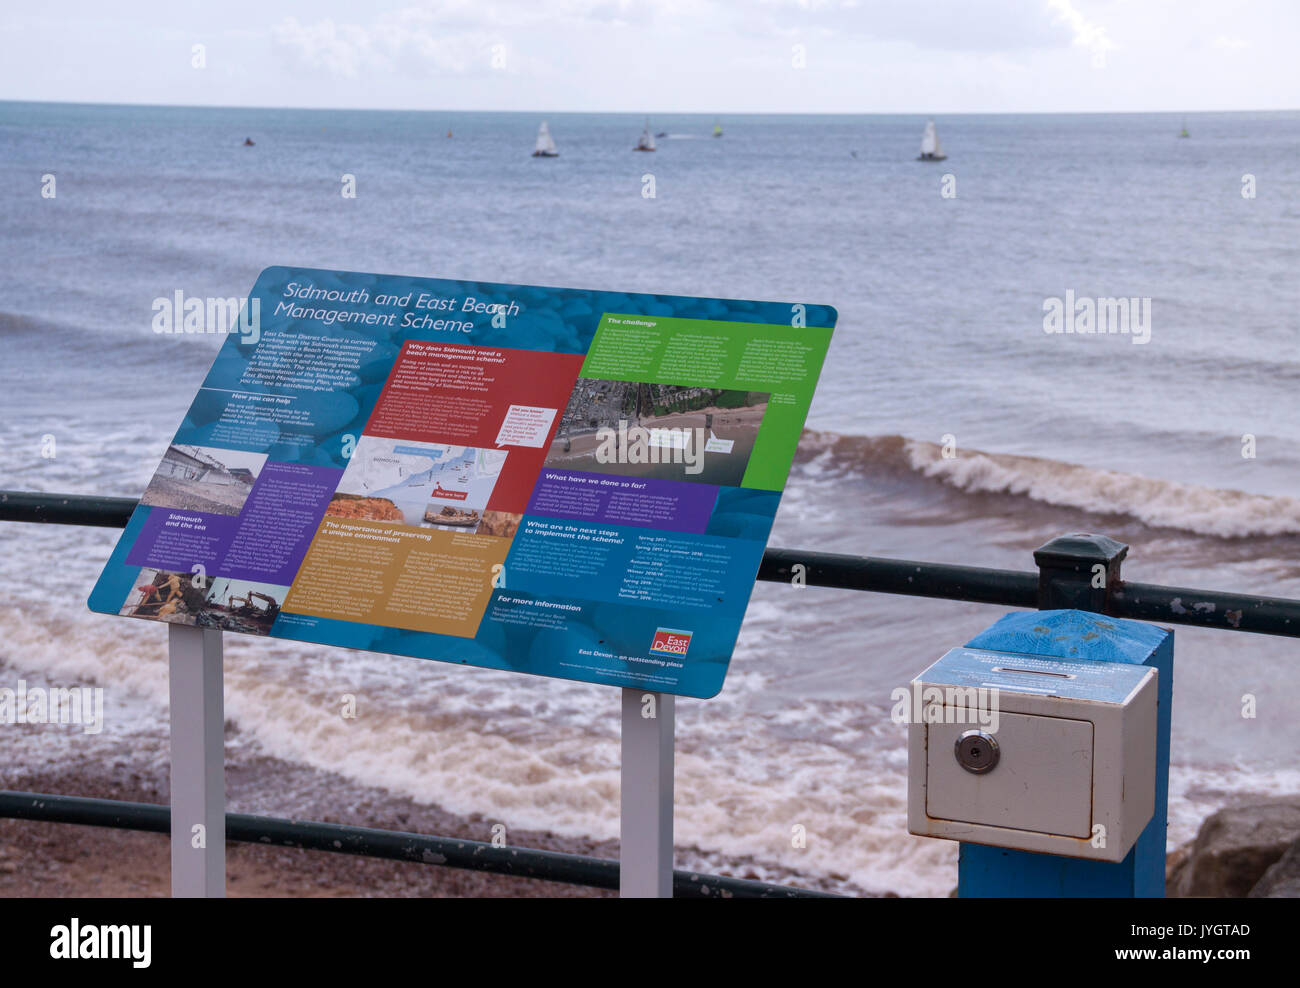 Sidmouth, 19th Aug 17 A council scheme to raise funds for beach management in Sidmouth, Devon has backfired. The collection box and information board that cost £1,400 has collected only £100 in the four months following it being fitted to the seafront location in April. East Devon District Council needs to find £3.3 miillion to reach its beach management target. Credit: Photo Central / Alamy Live News Stock Photo